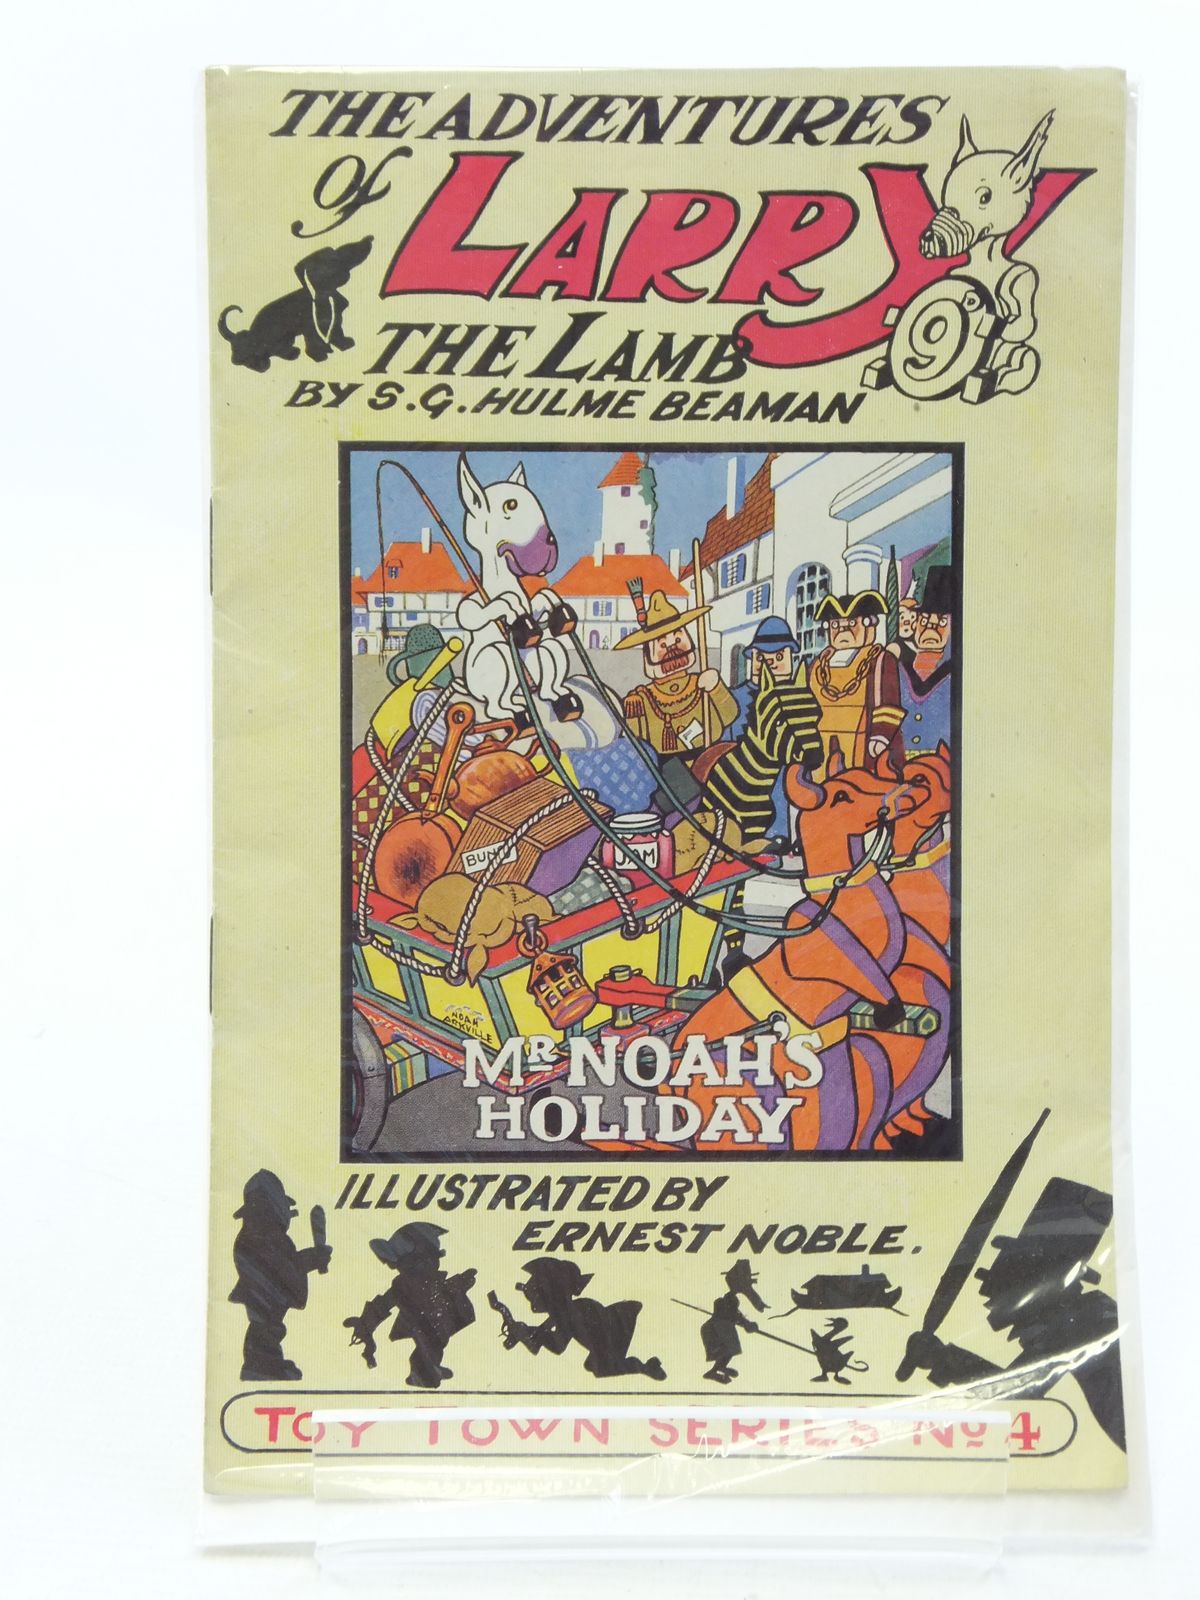 Photo of THE ADVENTURES OF LARRY THE LAMB - MR. NOAH'S HOLIDAY written by Beaman, S.G. Hulme illustrated by Noble, Ernest published by George Lapworth &amp; Co Ltd. (STOCK CODE: 1208030)  for sale by Stella & Rose's Books